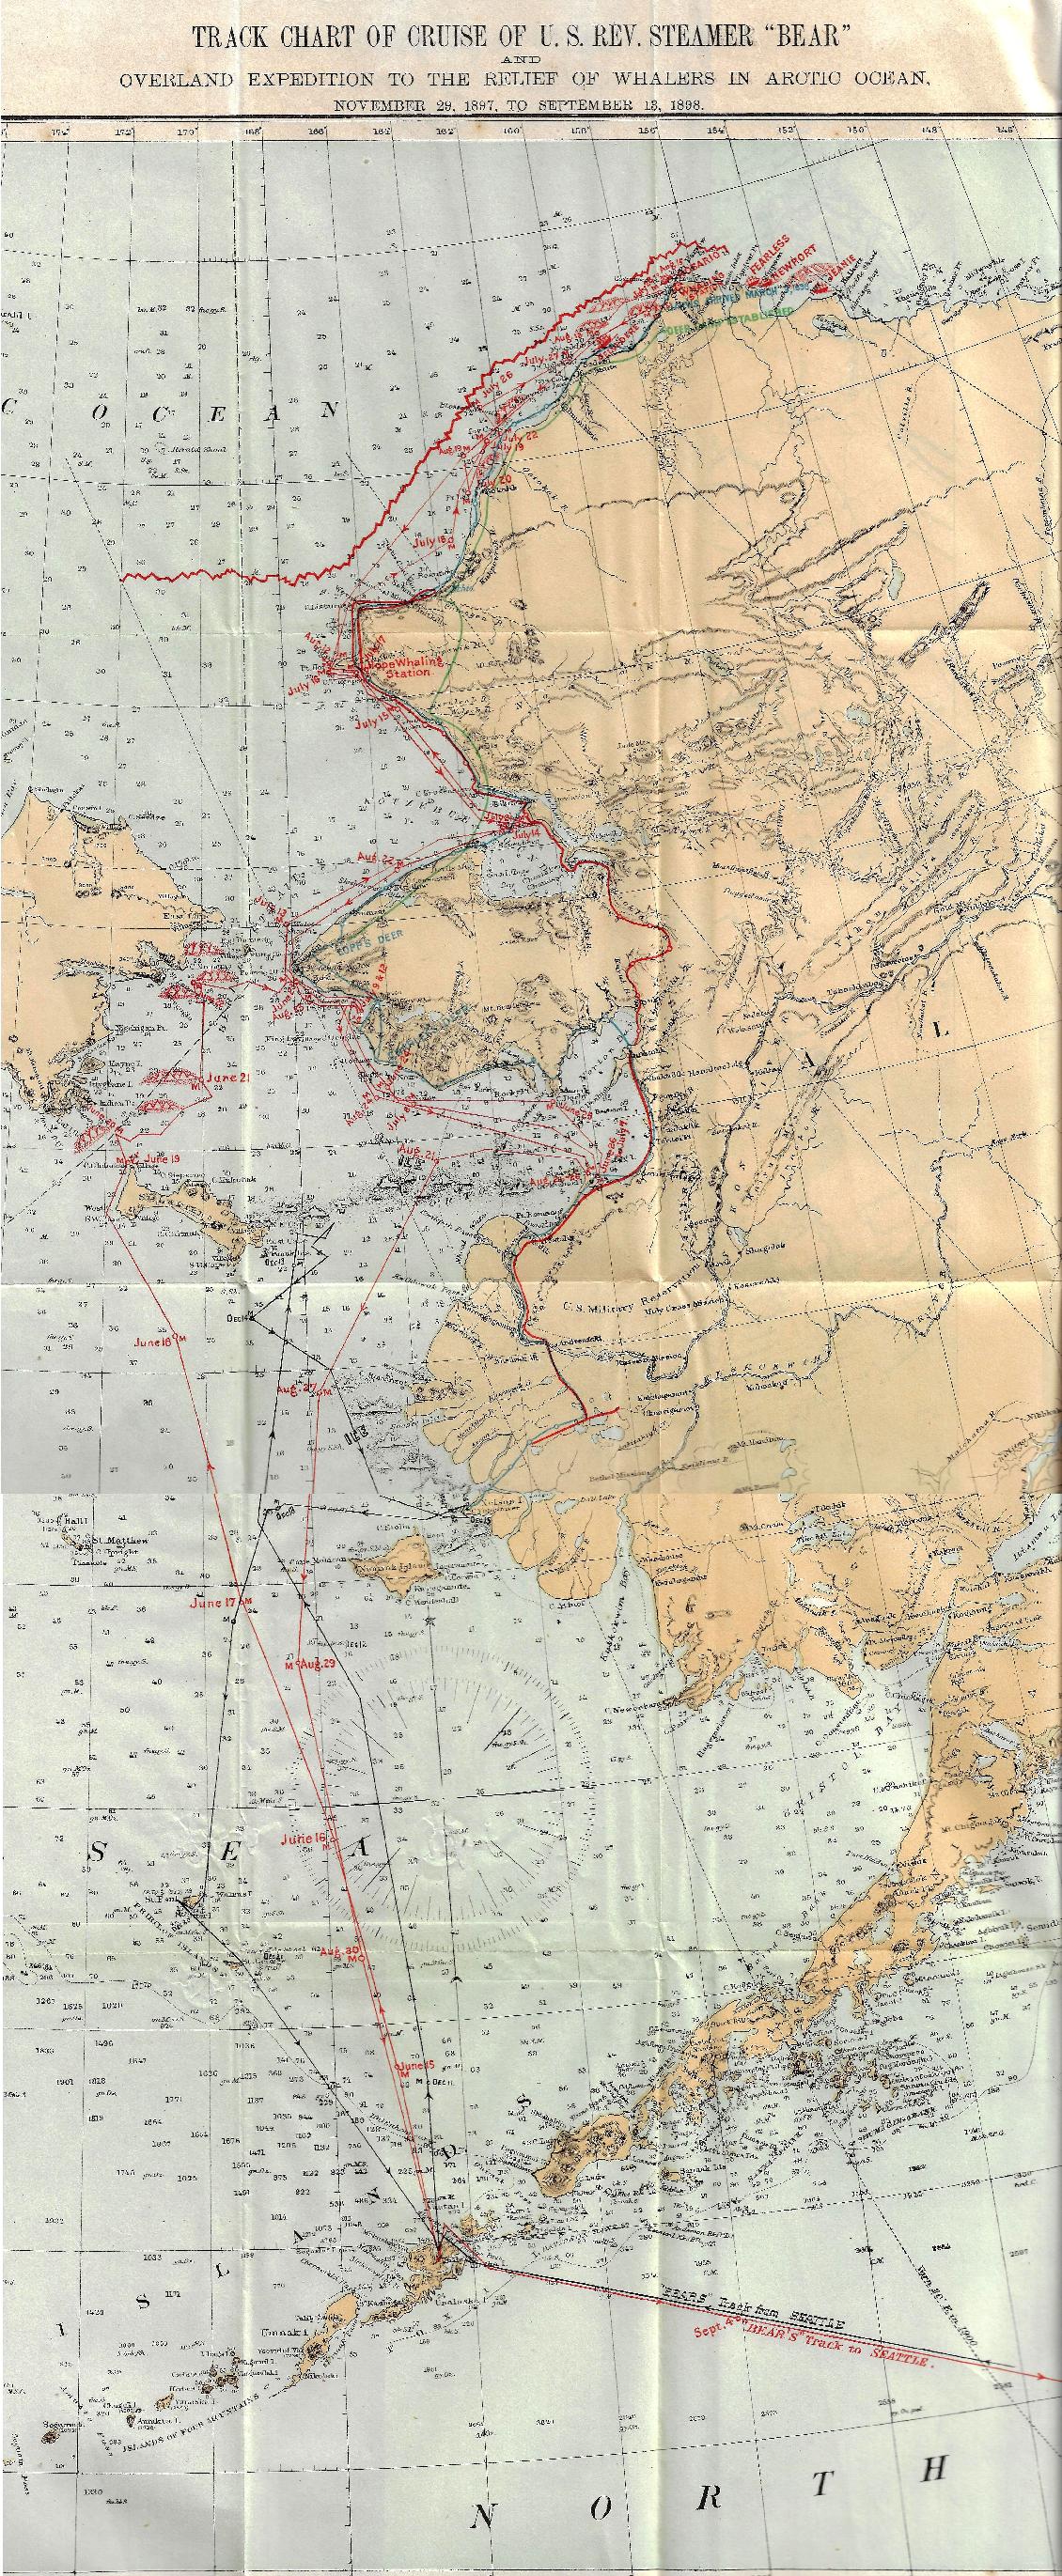 US Coast Guard Cutter Bear Rescue Expedition Map 1898